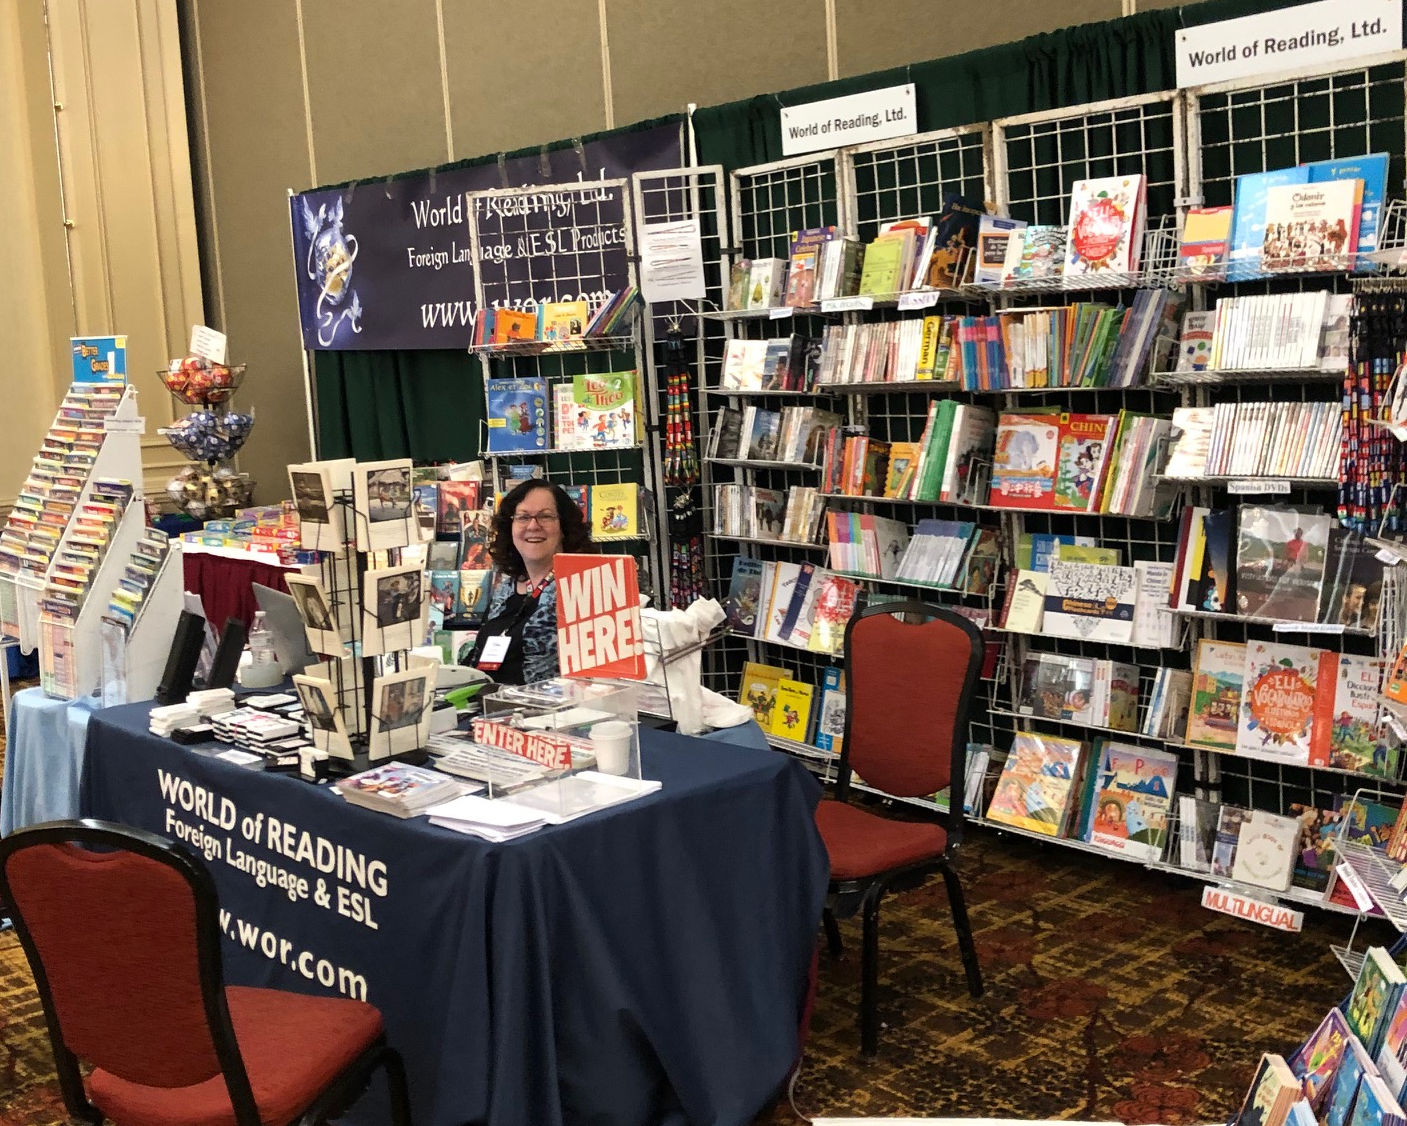 Interview with Cindy Tracy, owner of World of Reading